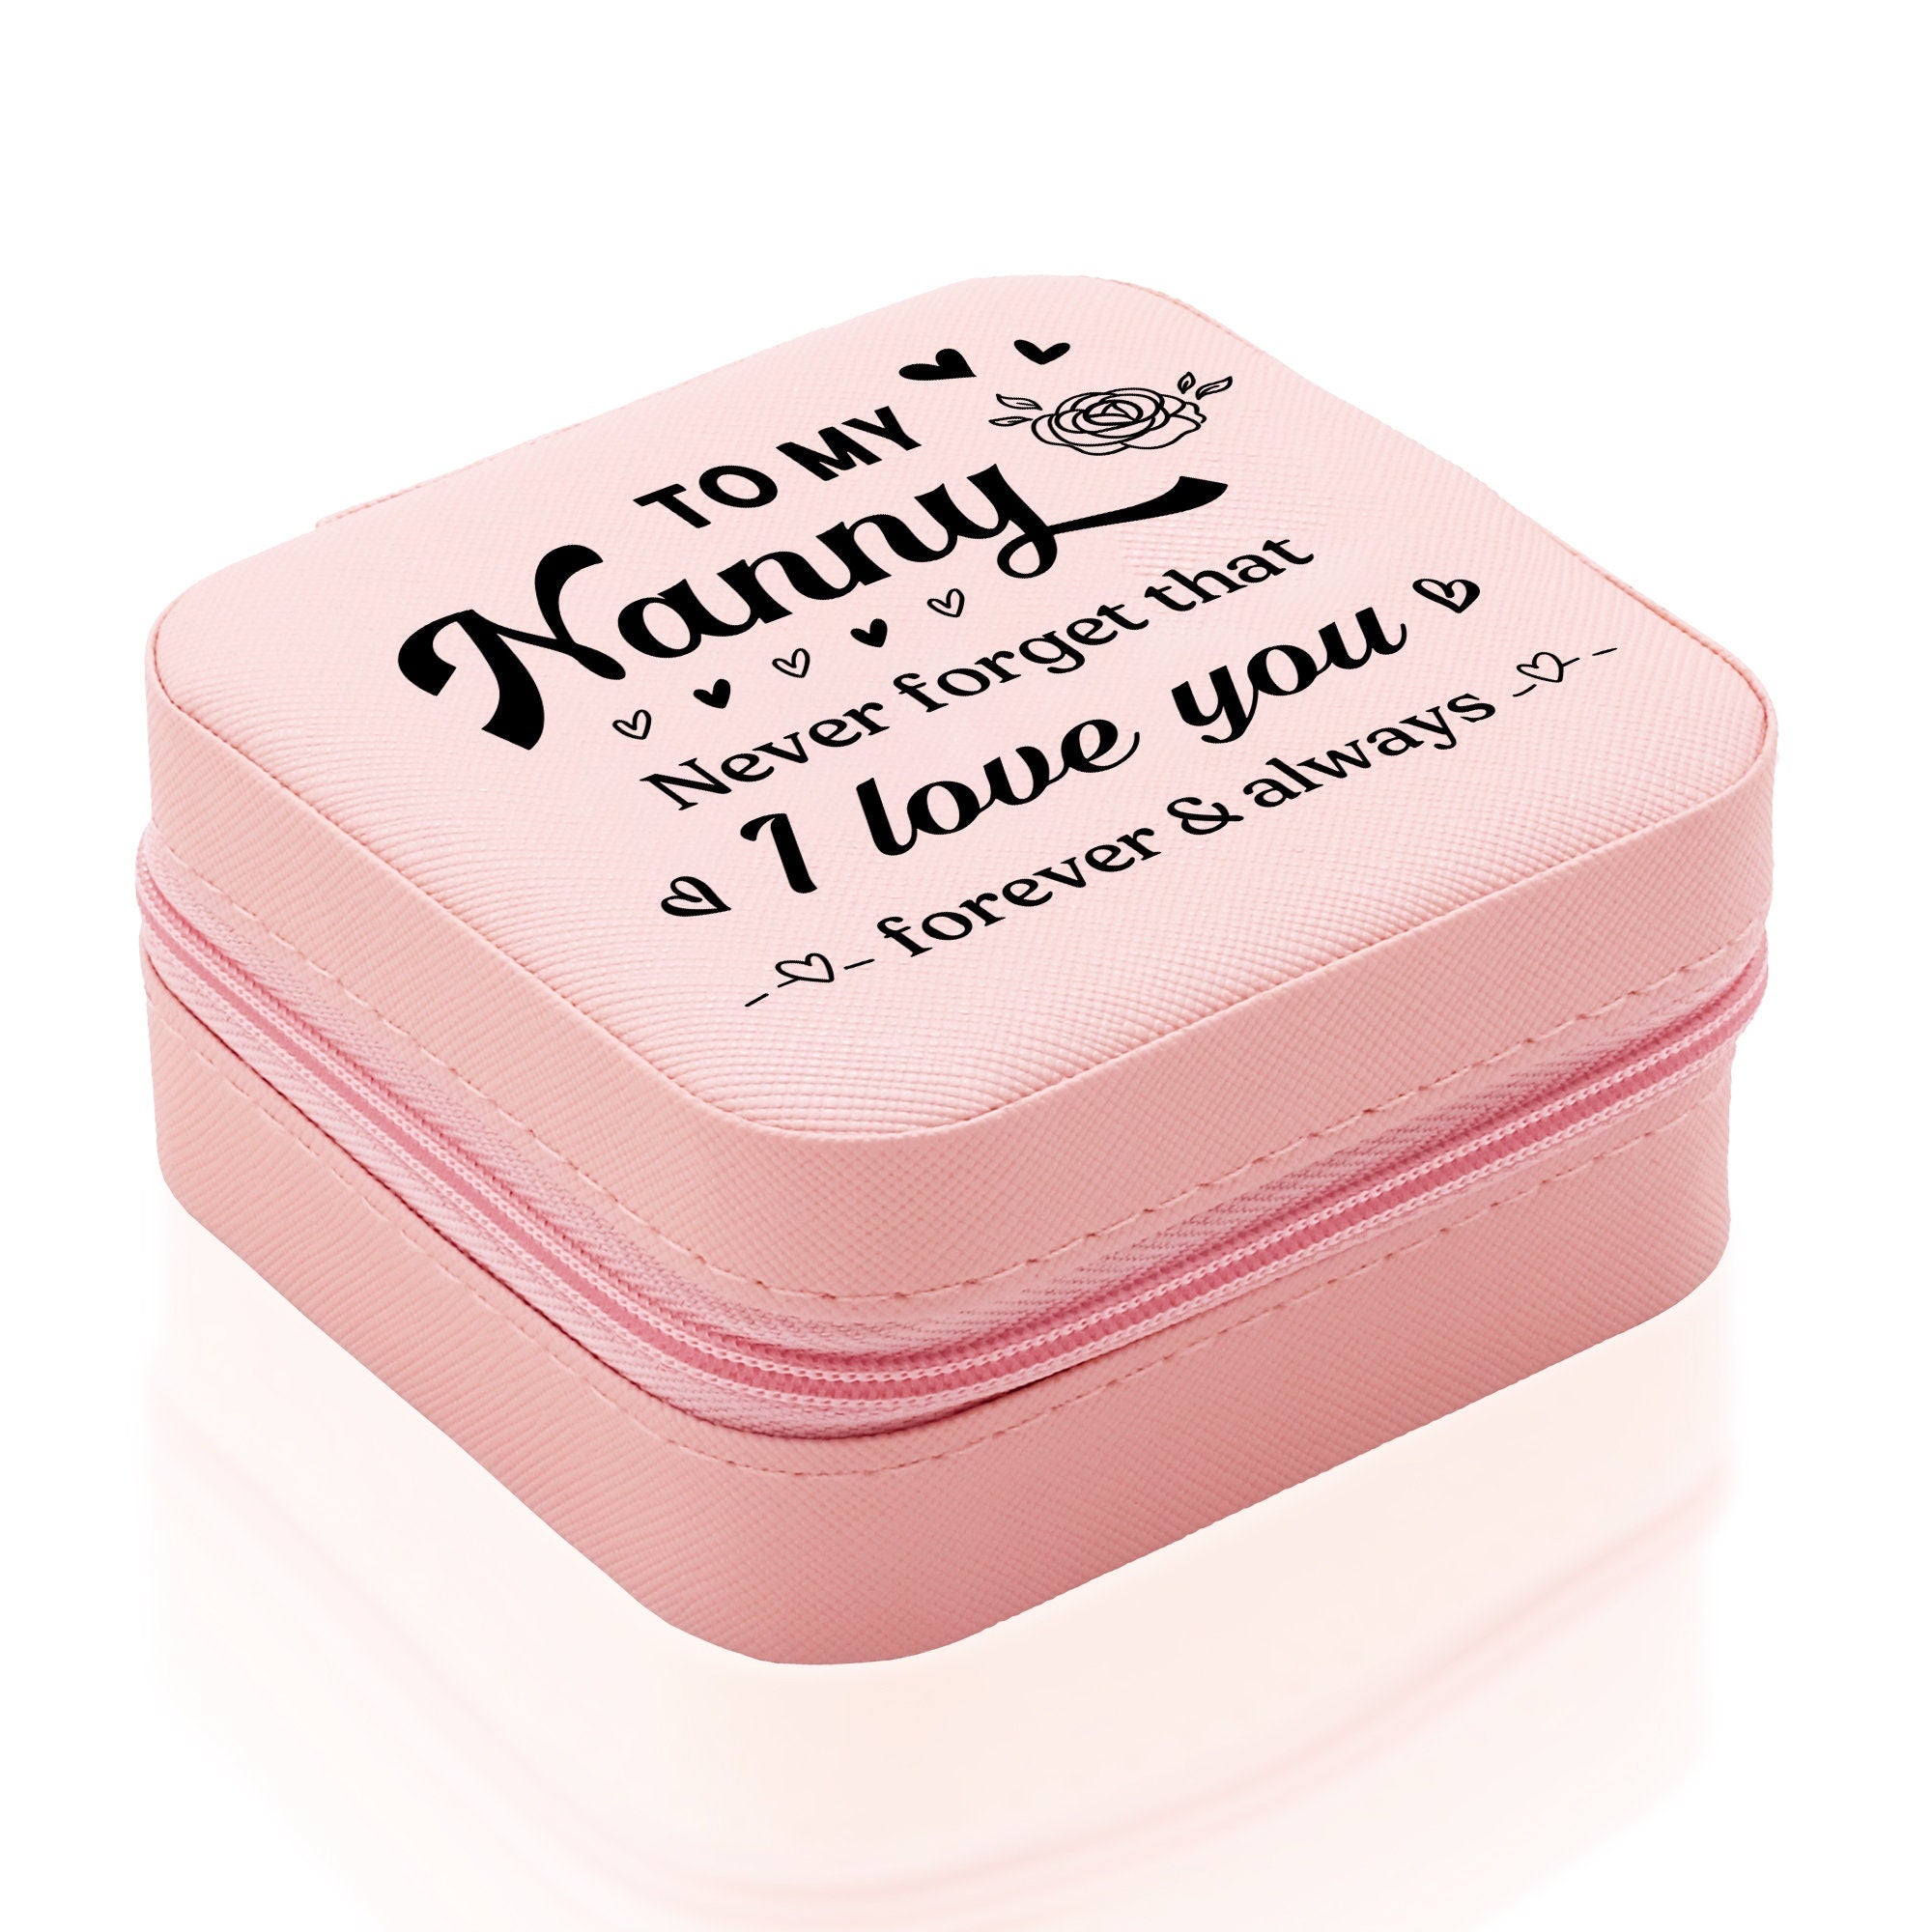 a small pink box with writing on it